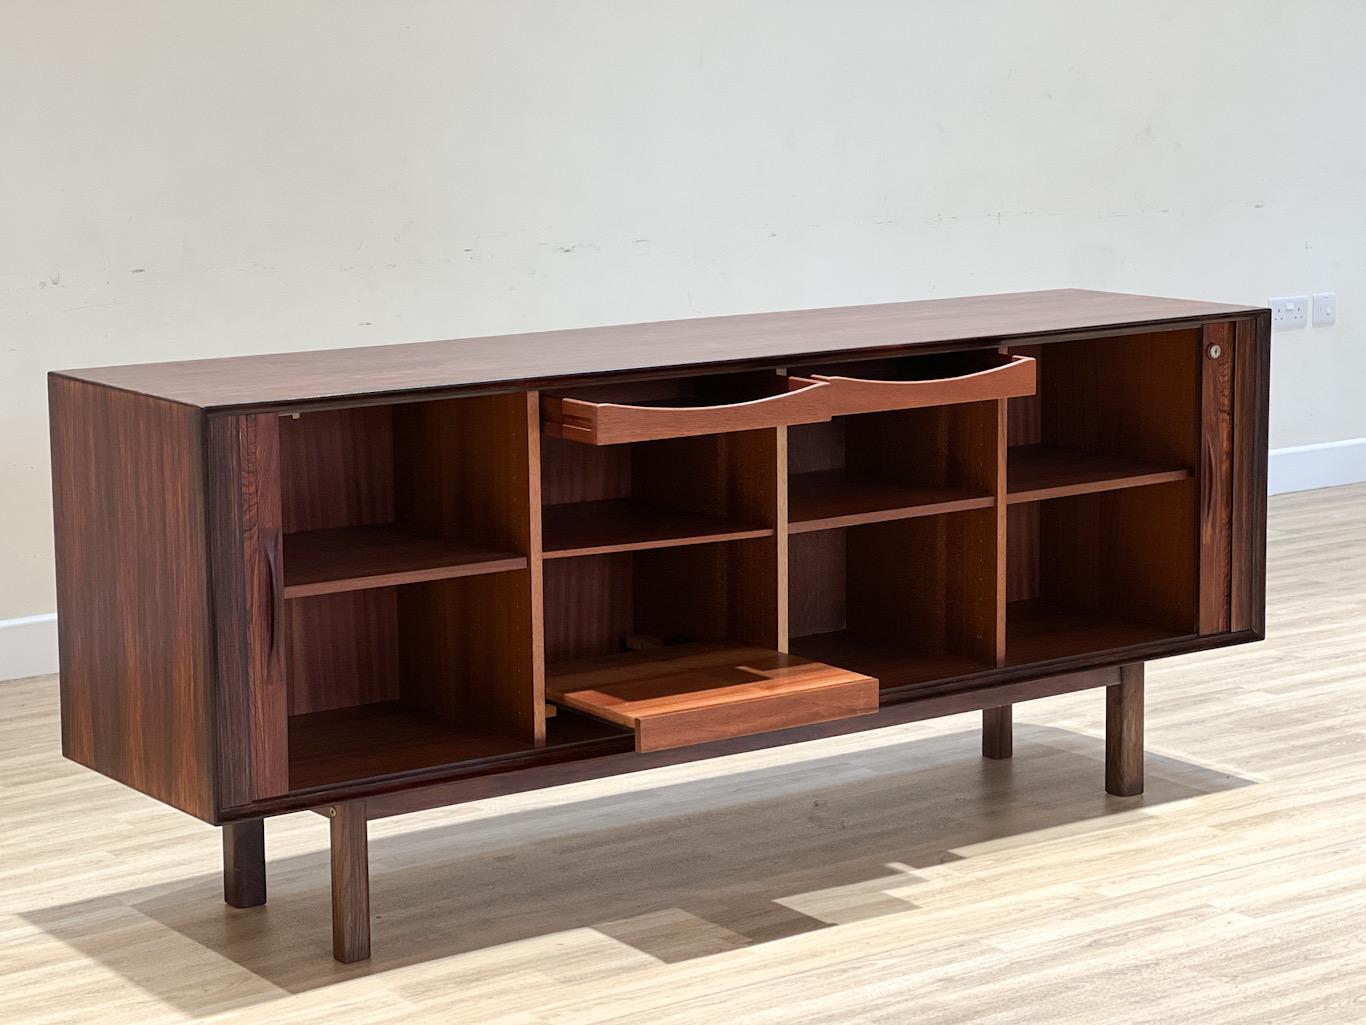 This stunning sideboard was created by the famous designer Arne Vodder and meticulously handcrafted in rosewood by the renowned Danish cabinetmaker Sibast in the 1960s. It is a testament to the exceptional craftsmanship and design of its era. 

One